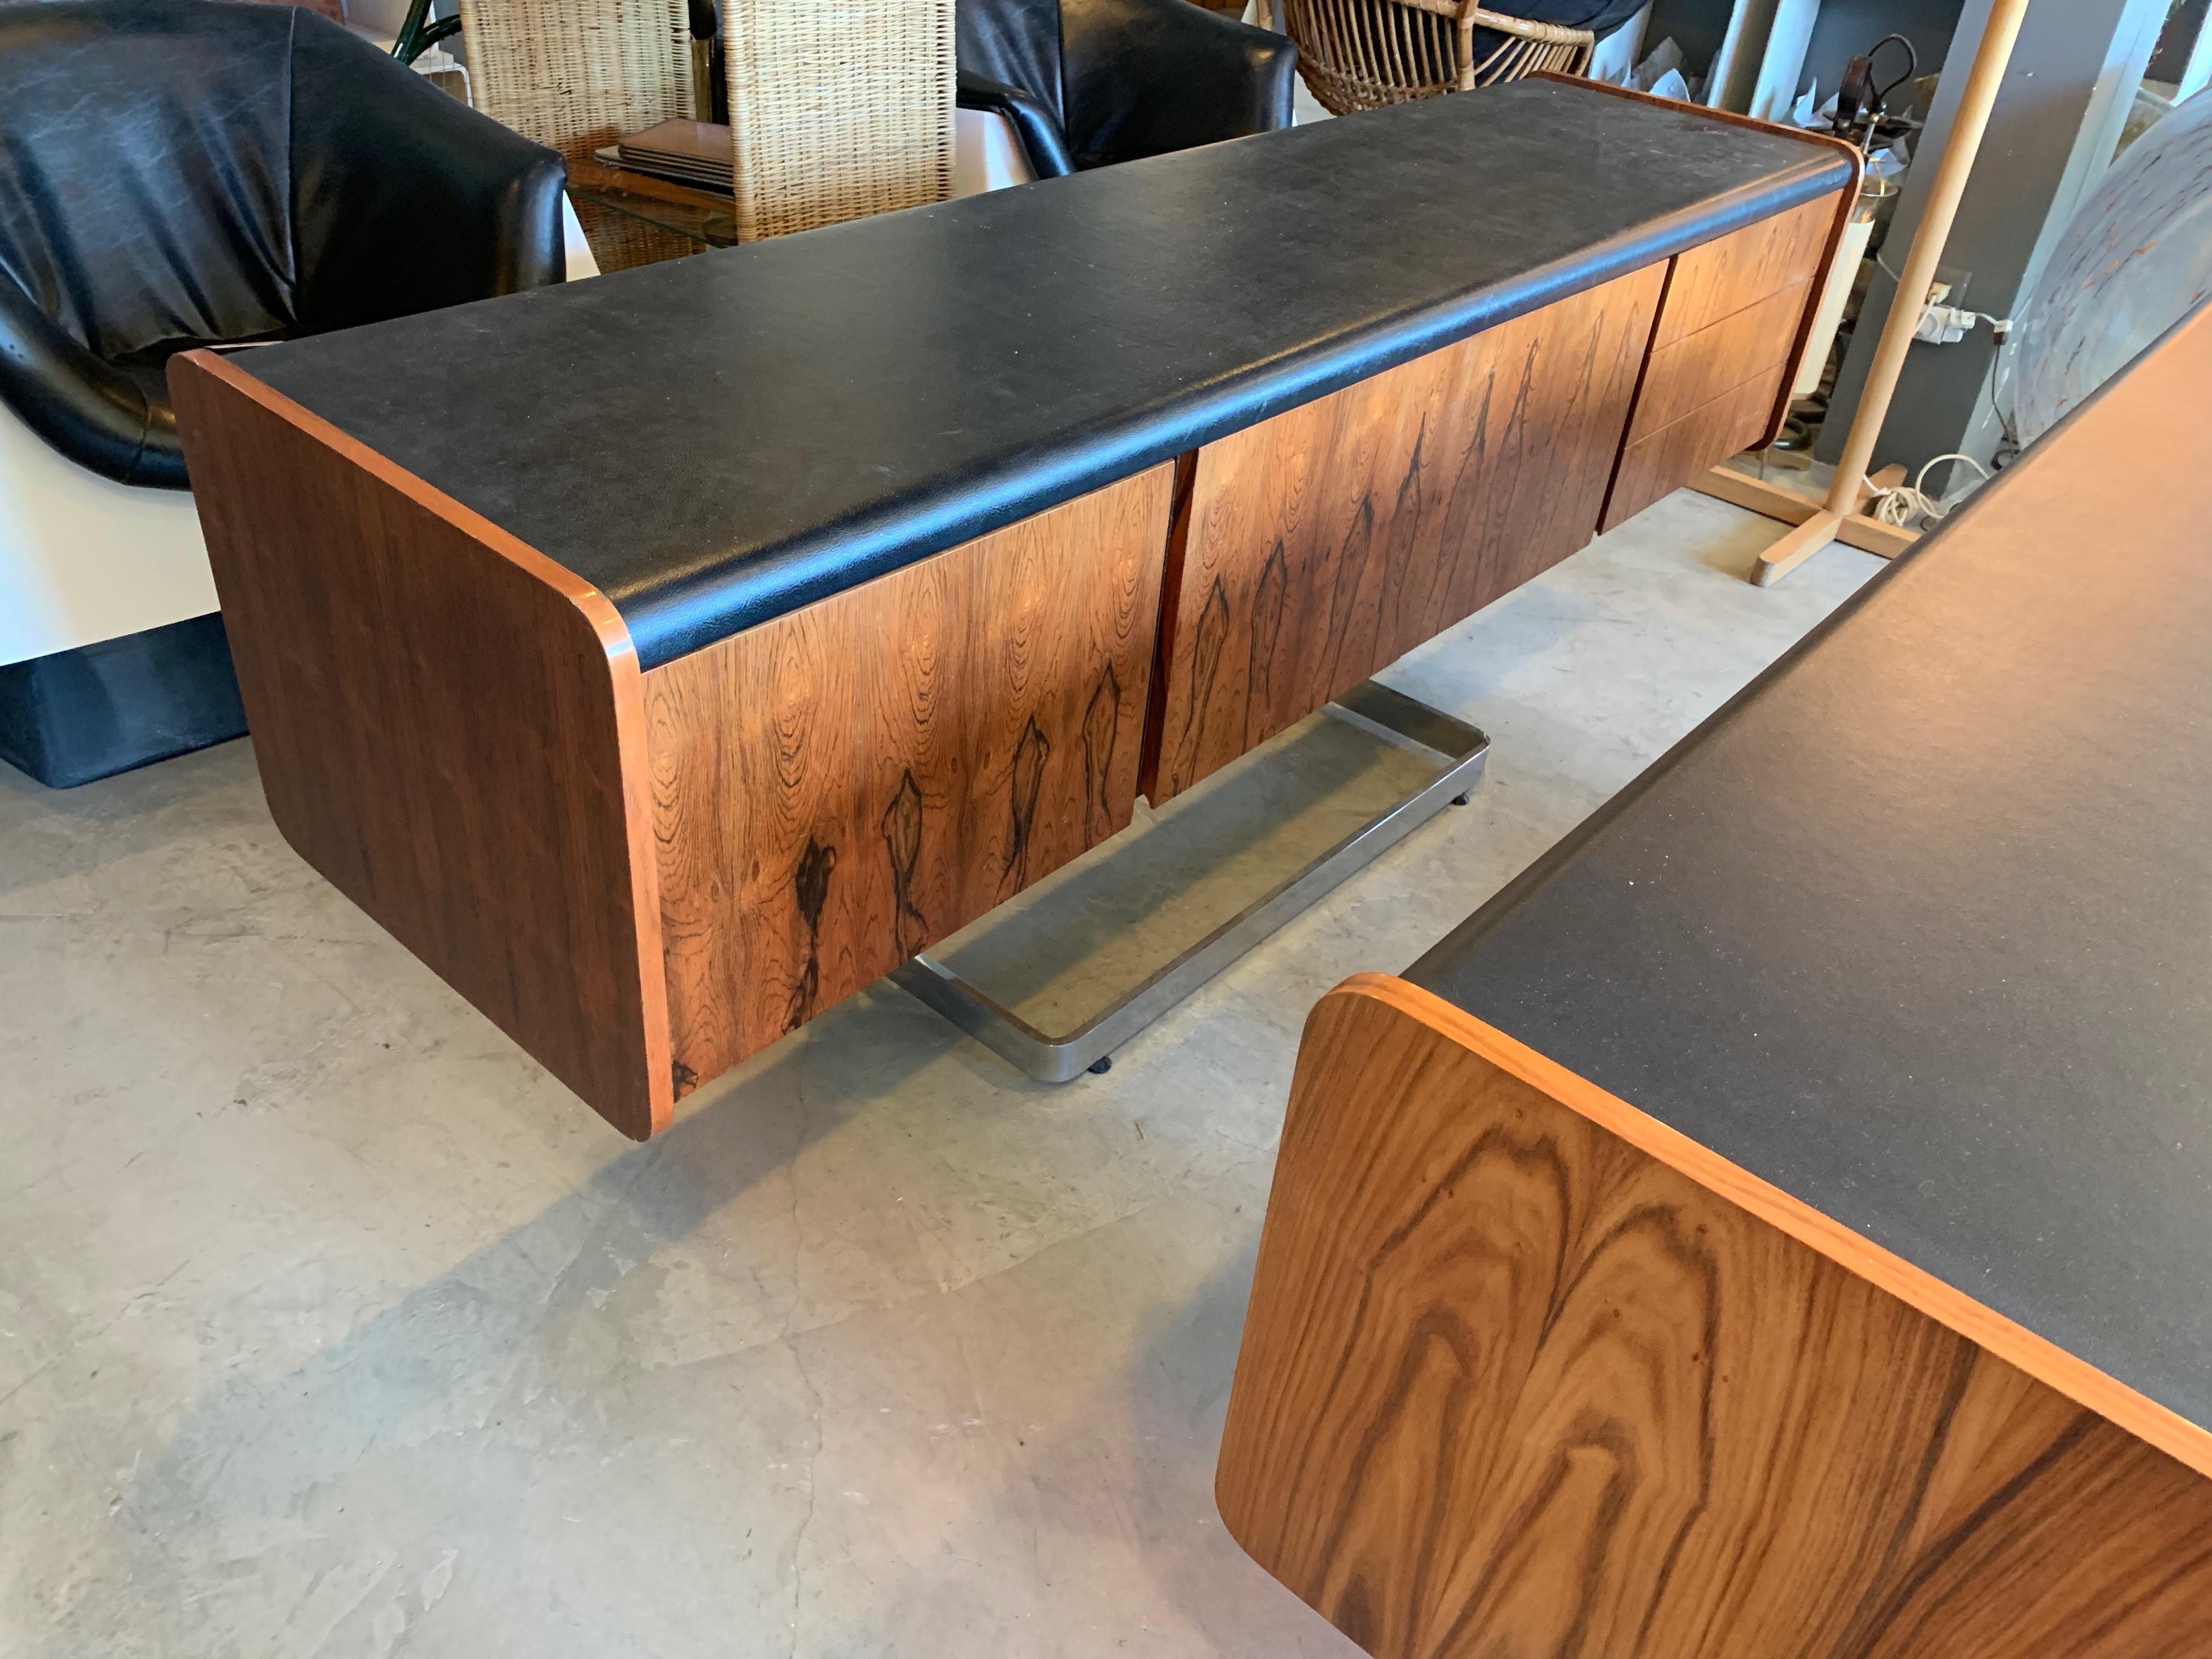 Stunning credenza by Ste. Marie & Laurent. Floating rosewood frame with cantilevered chrome base. Three drawers on the right and large functional file drawer on the left. Original locks in great working condition with keys. 2 cupboard doors in the